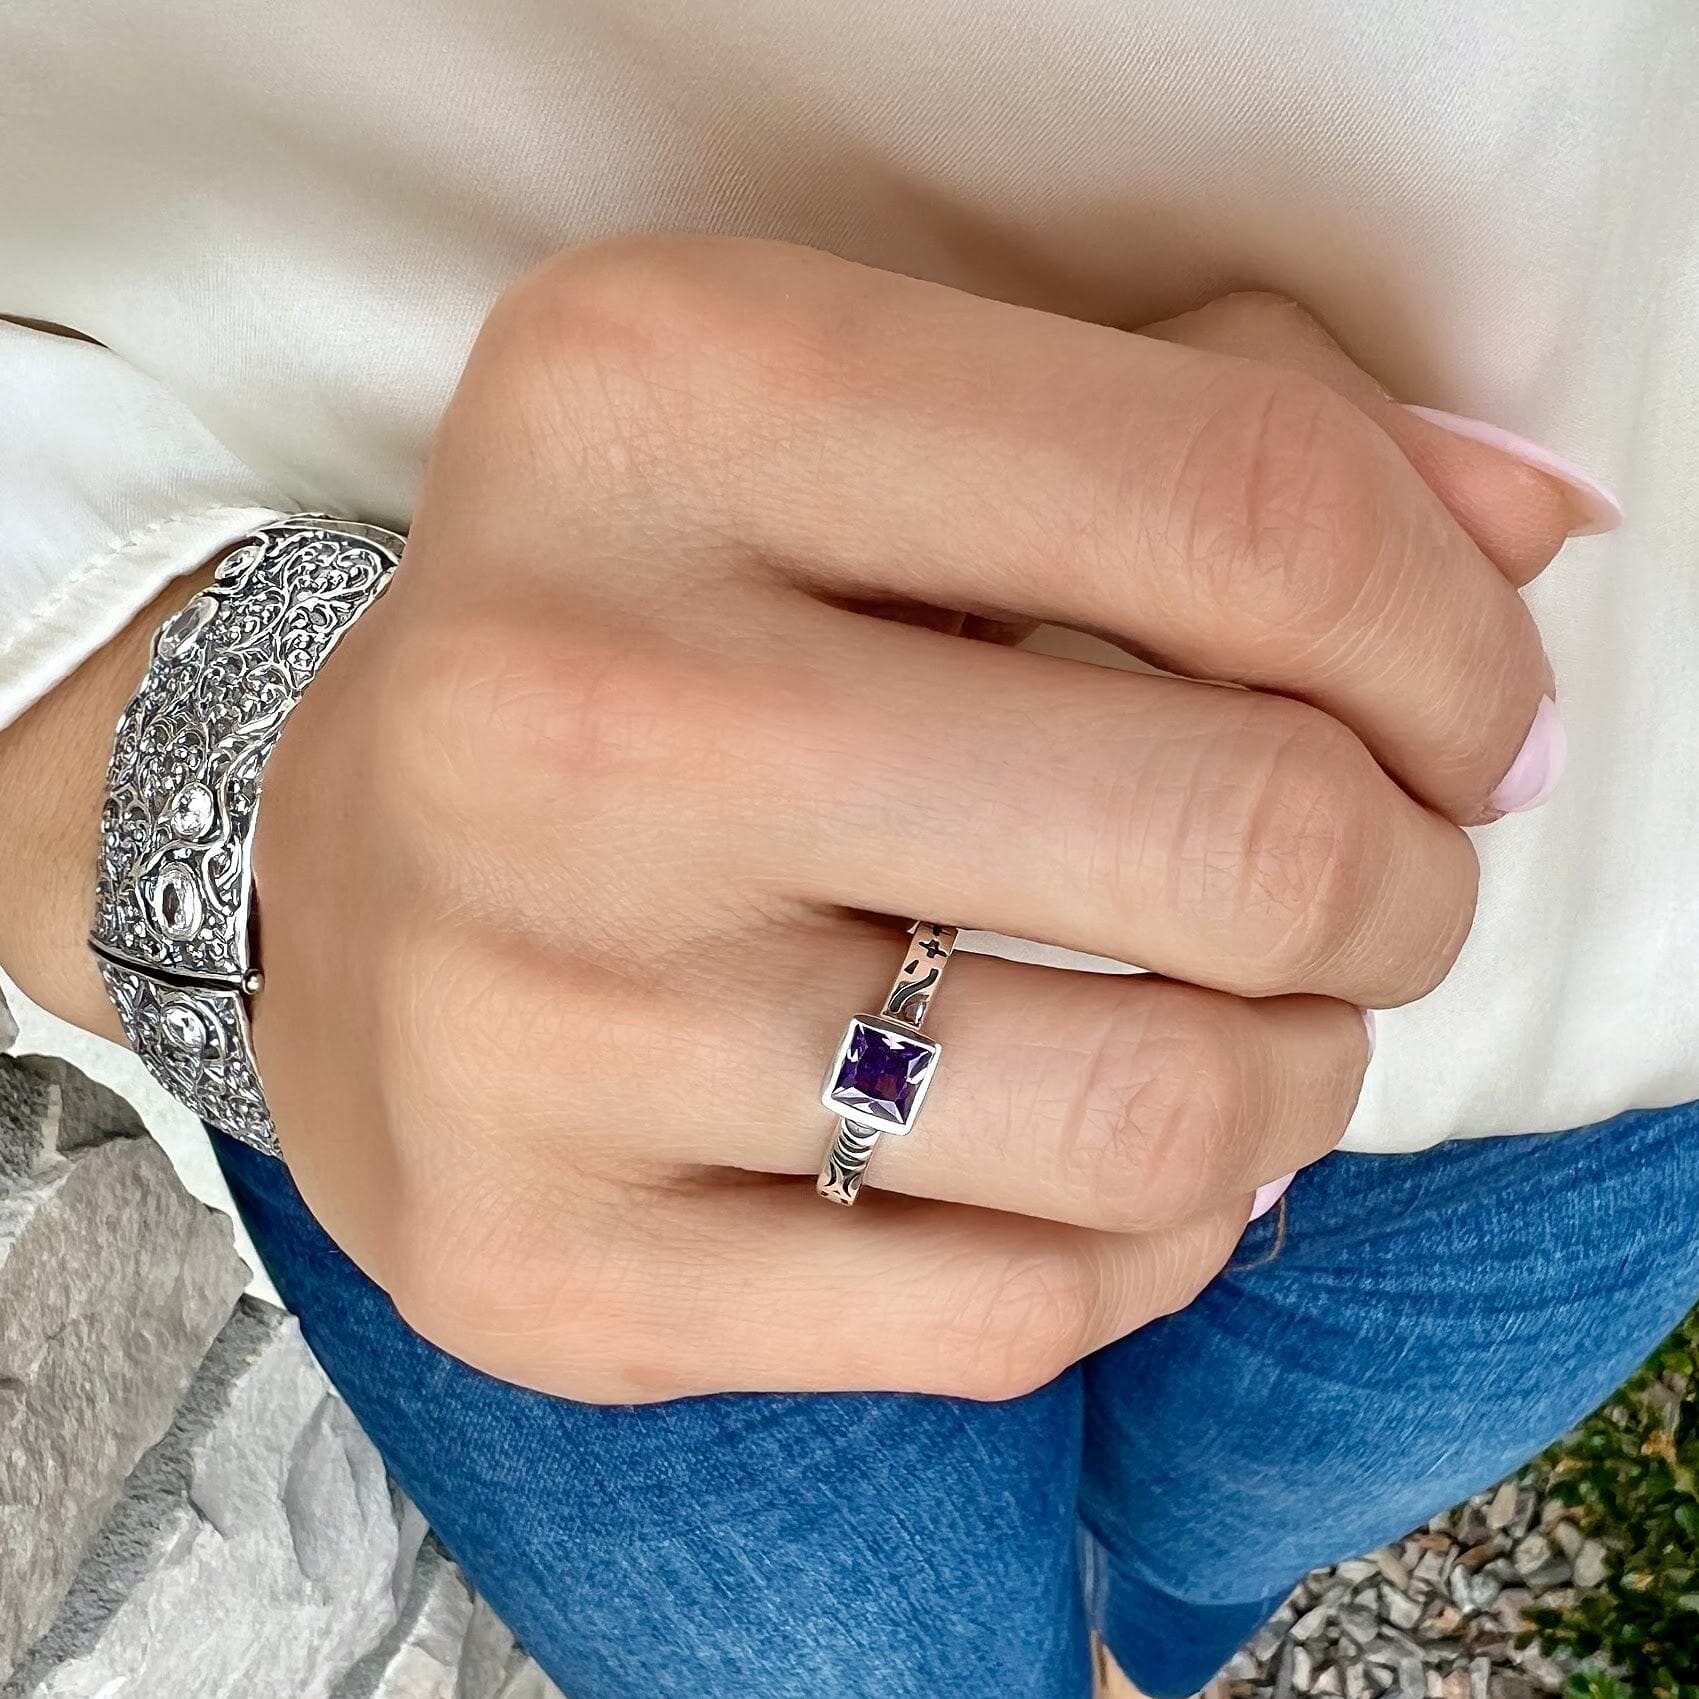 dainty amethyst cz Sugarplum Ring paired with chunky Upper Class Bracelet